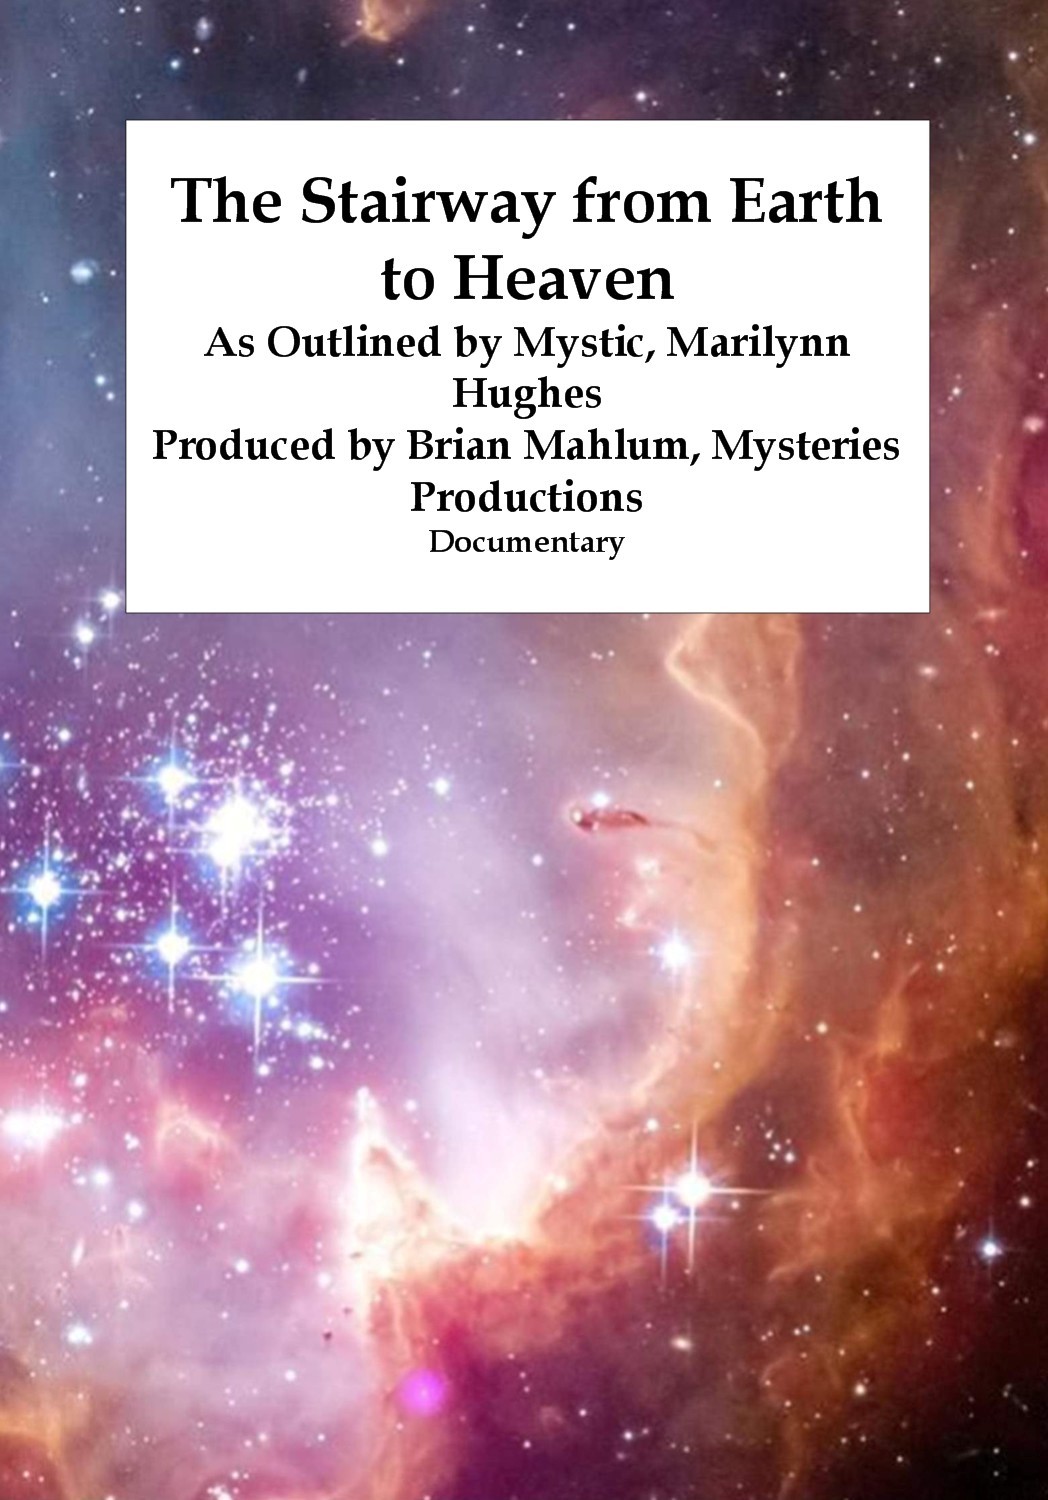 Documentary Film. As Outlined by Mystic, Marilynn Hughes of 'The Out-of-Body Travel Foundation.' Produced by Brian Mahlum, Mysteries Productions